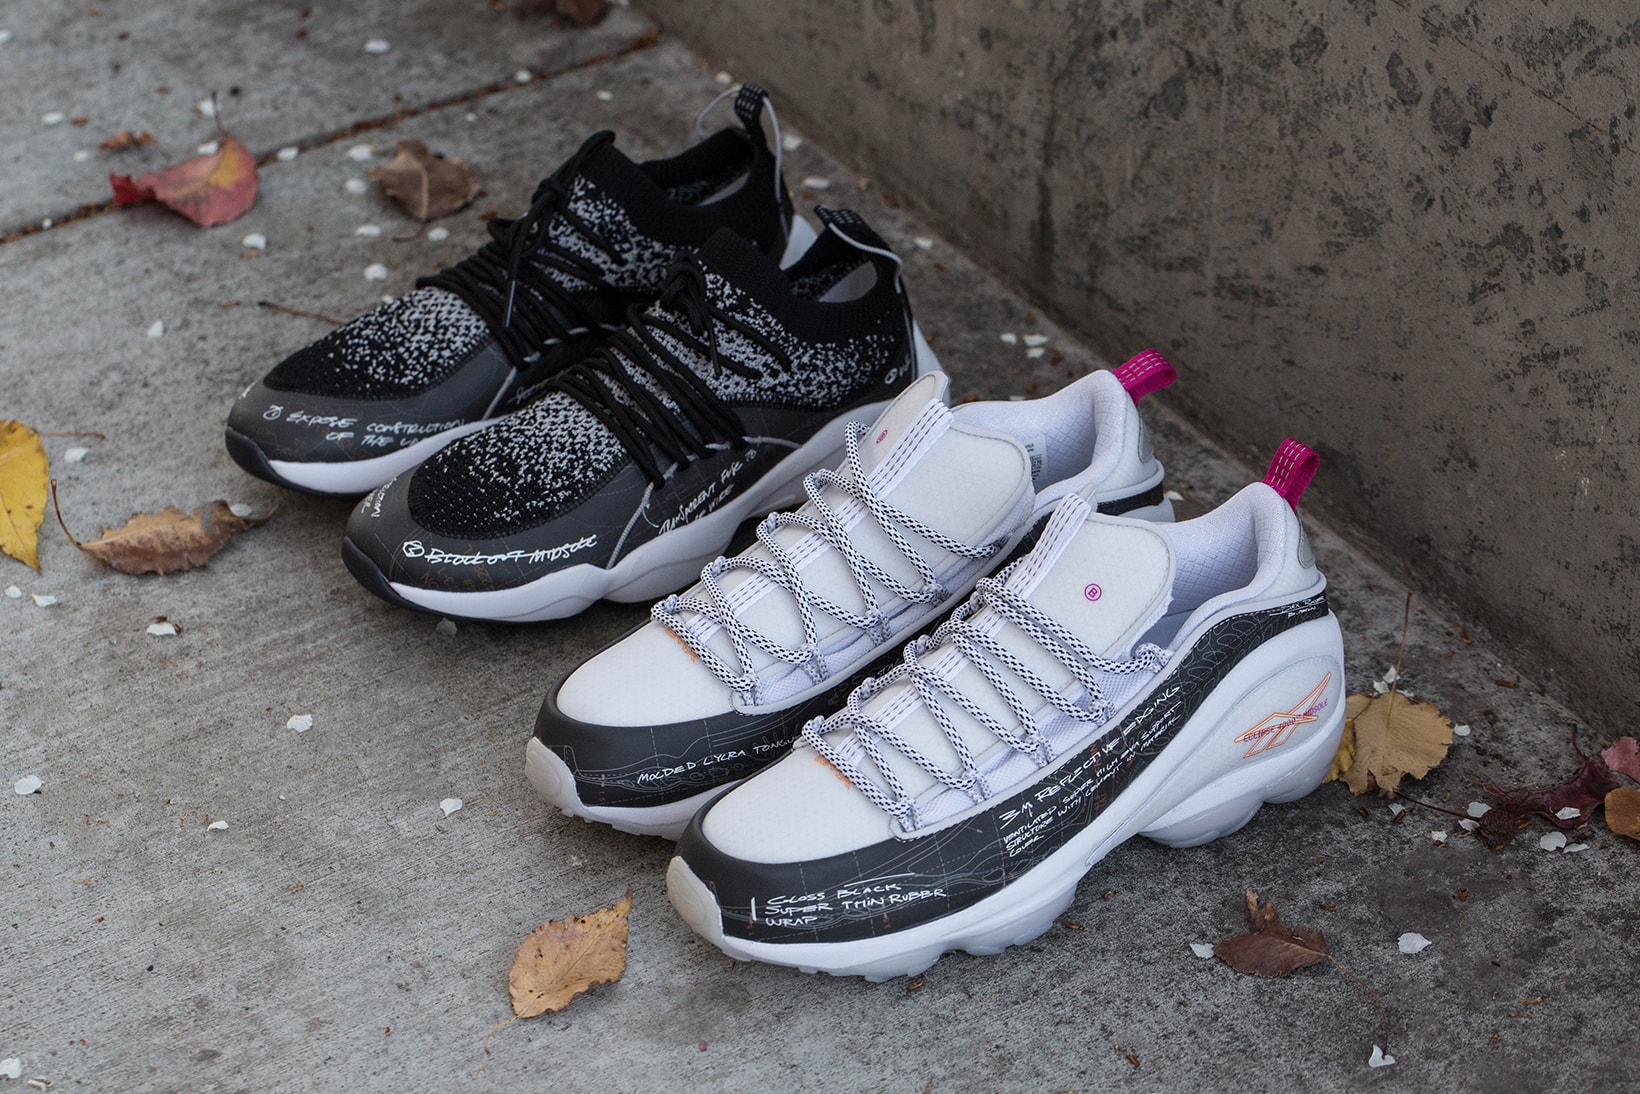 BAIT Reebok DMX 10 Fusion Ideation Department pack 2018 february release date info sneakers shoes footwear